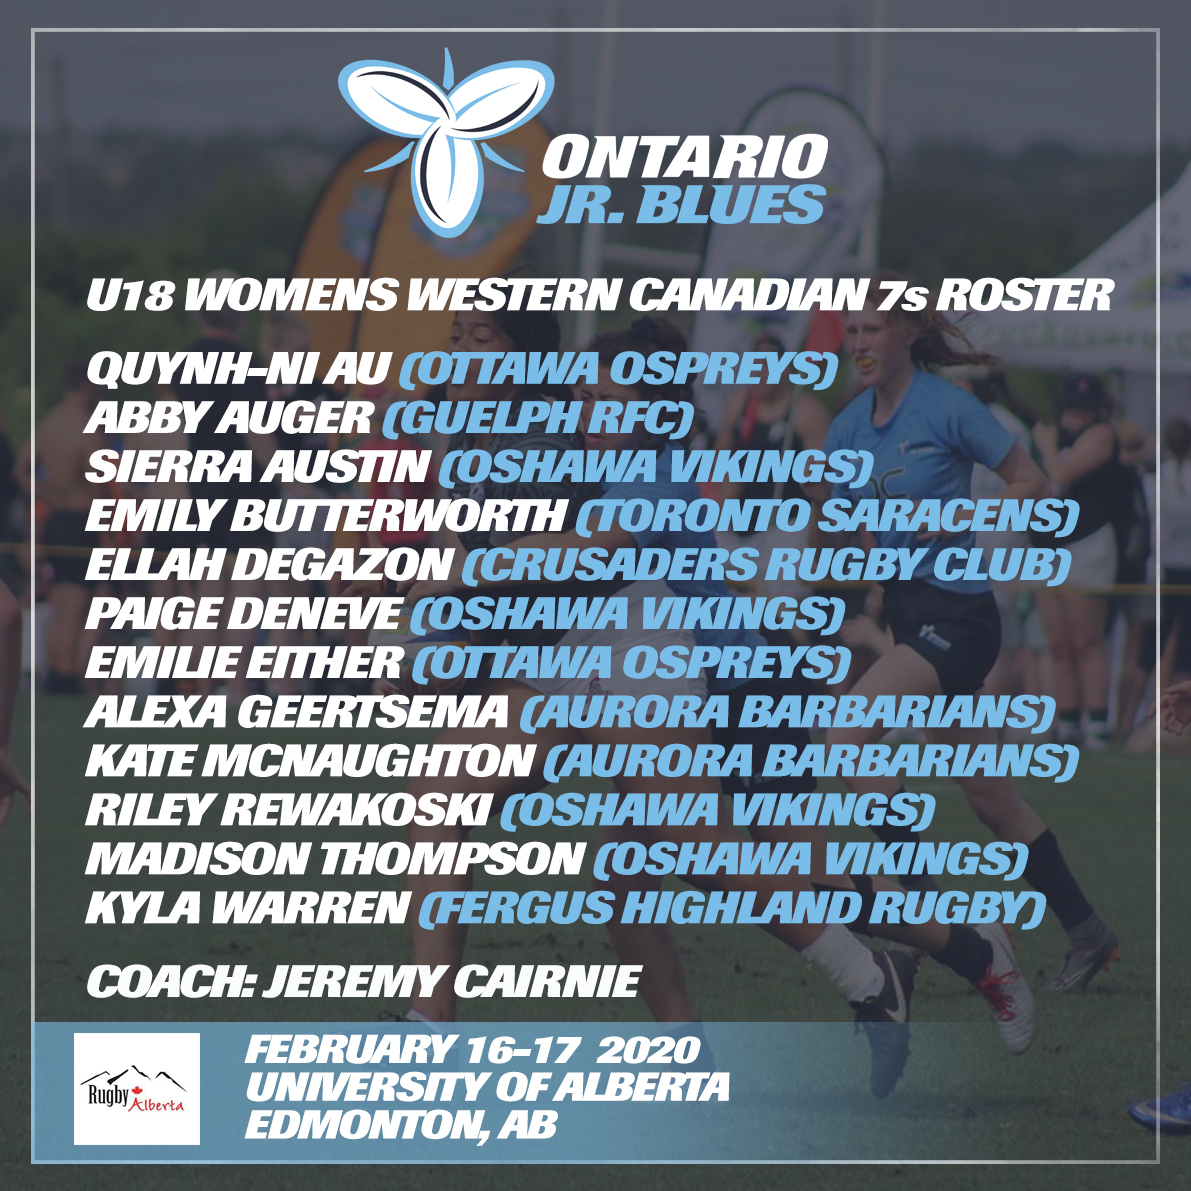 The Ontario Jr. Blues 7s Program travels to Edmonton this weekend for the Western Canadian 7s, held in Edmonton from February 16th - 17th. The Blues will field a U18 Boys and U18 Girls team. Congratulations to all the players making the trip!